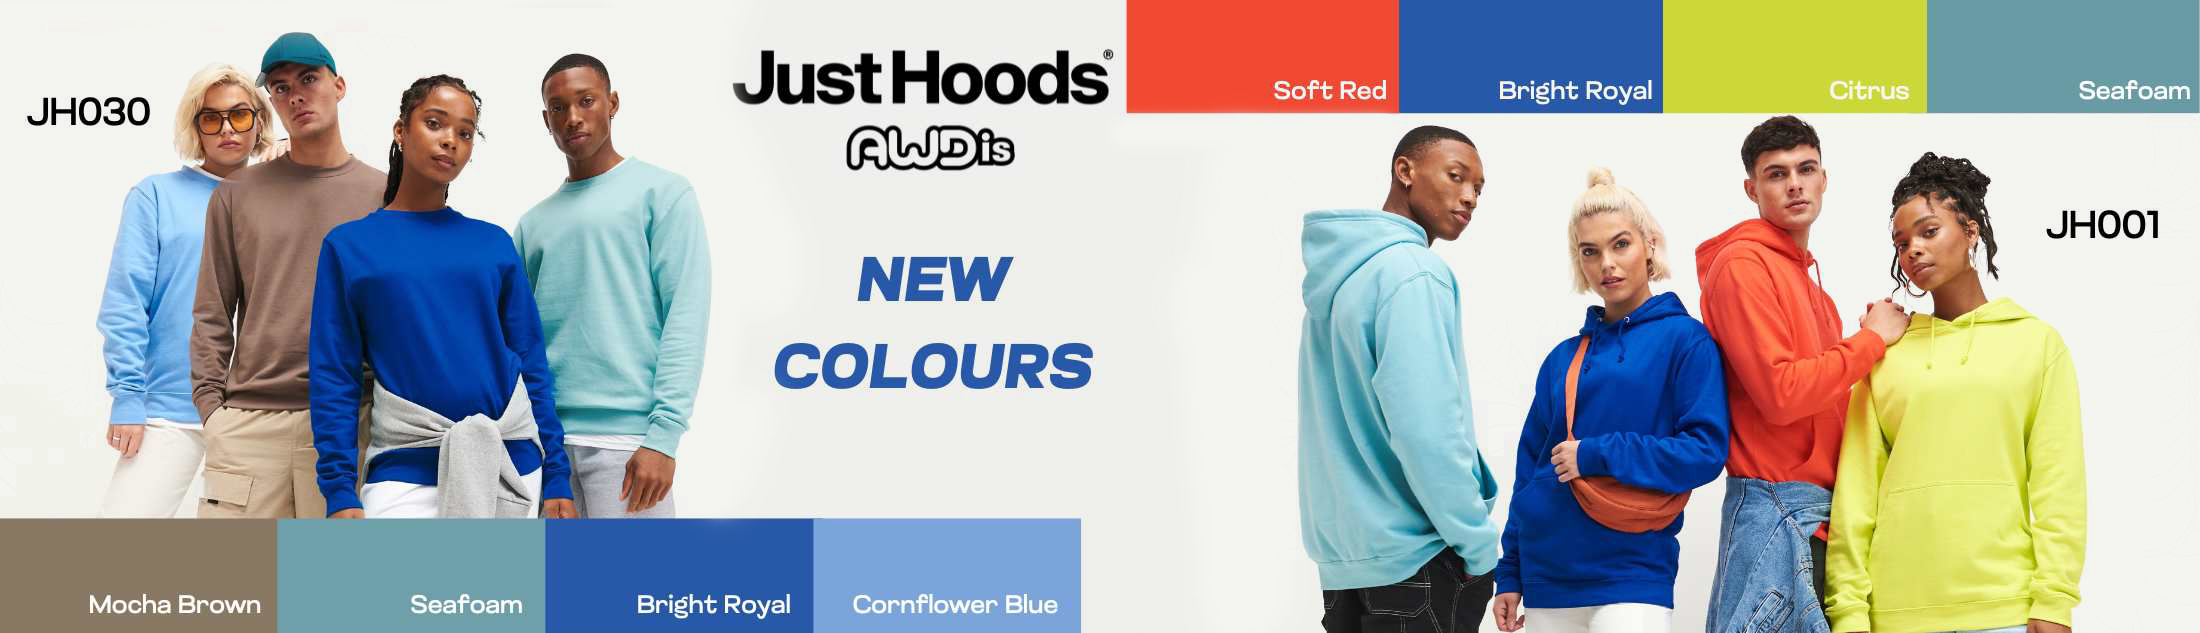 Just Hoods NEW colours 